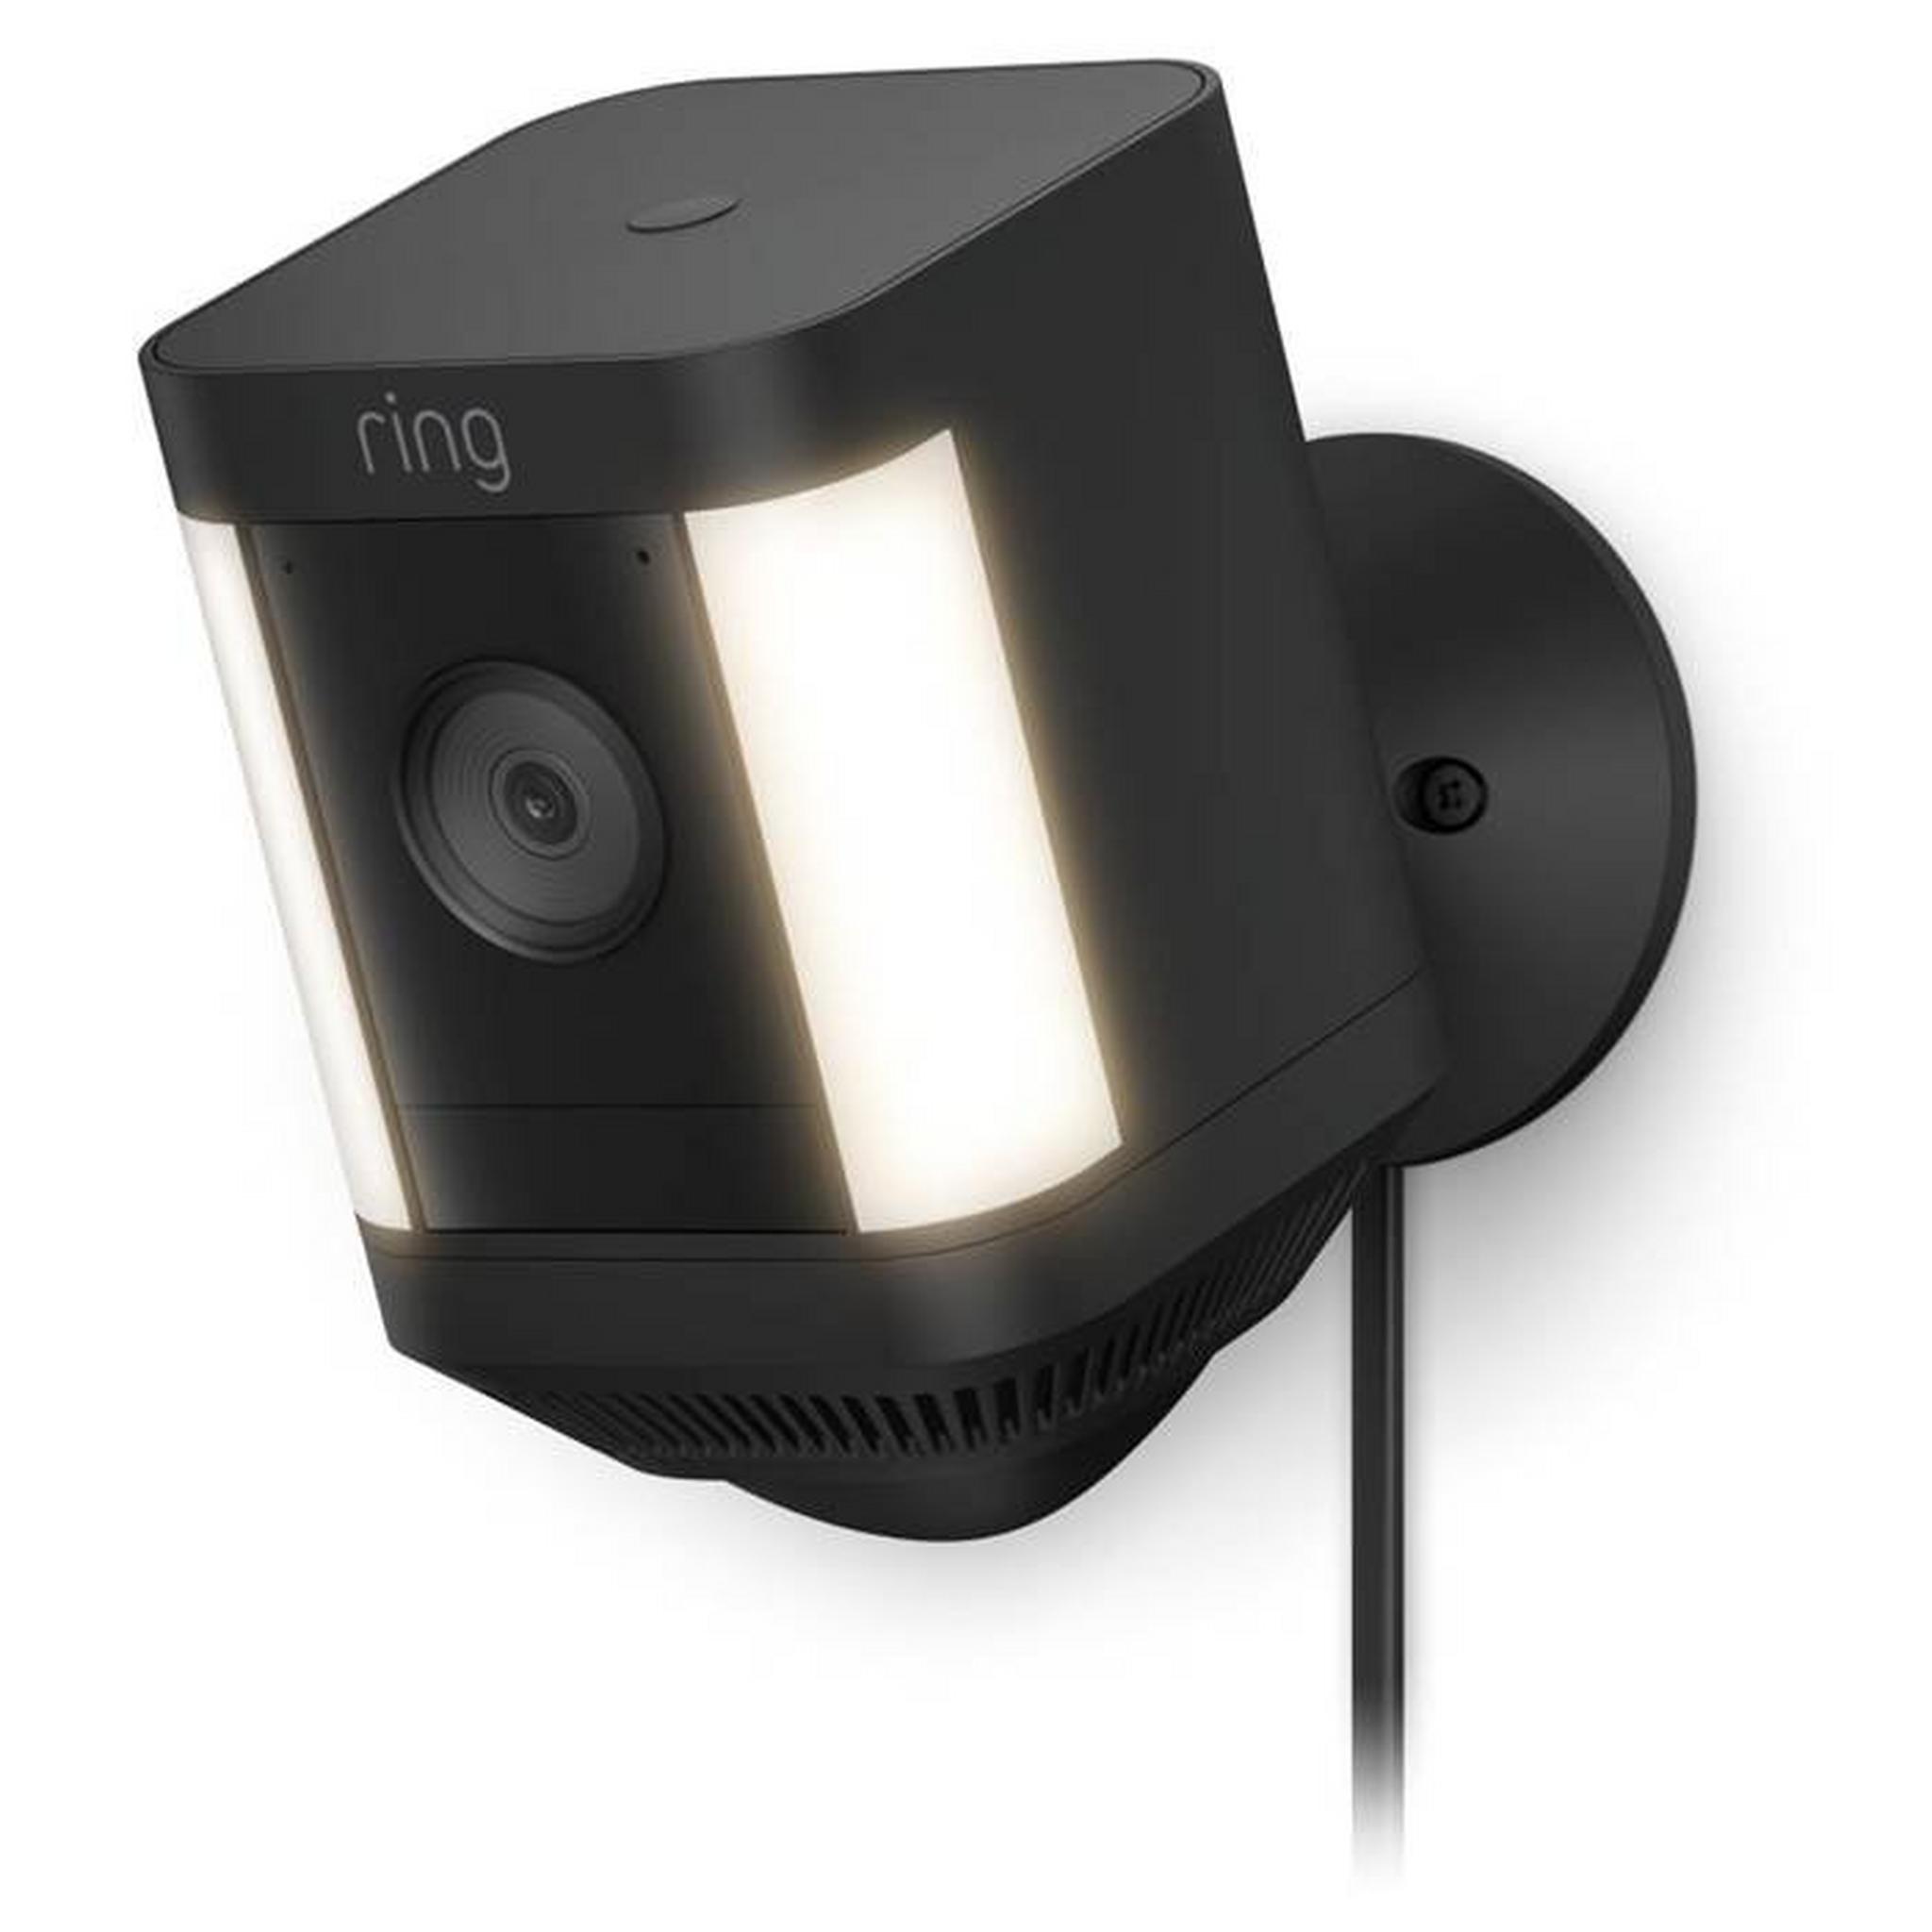 Ring Spotlight Cam Plus Plug In Security Camera, with Built -in Security Siren, +2 LED Spotlights, 8SH1S2-BME0 - Black